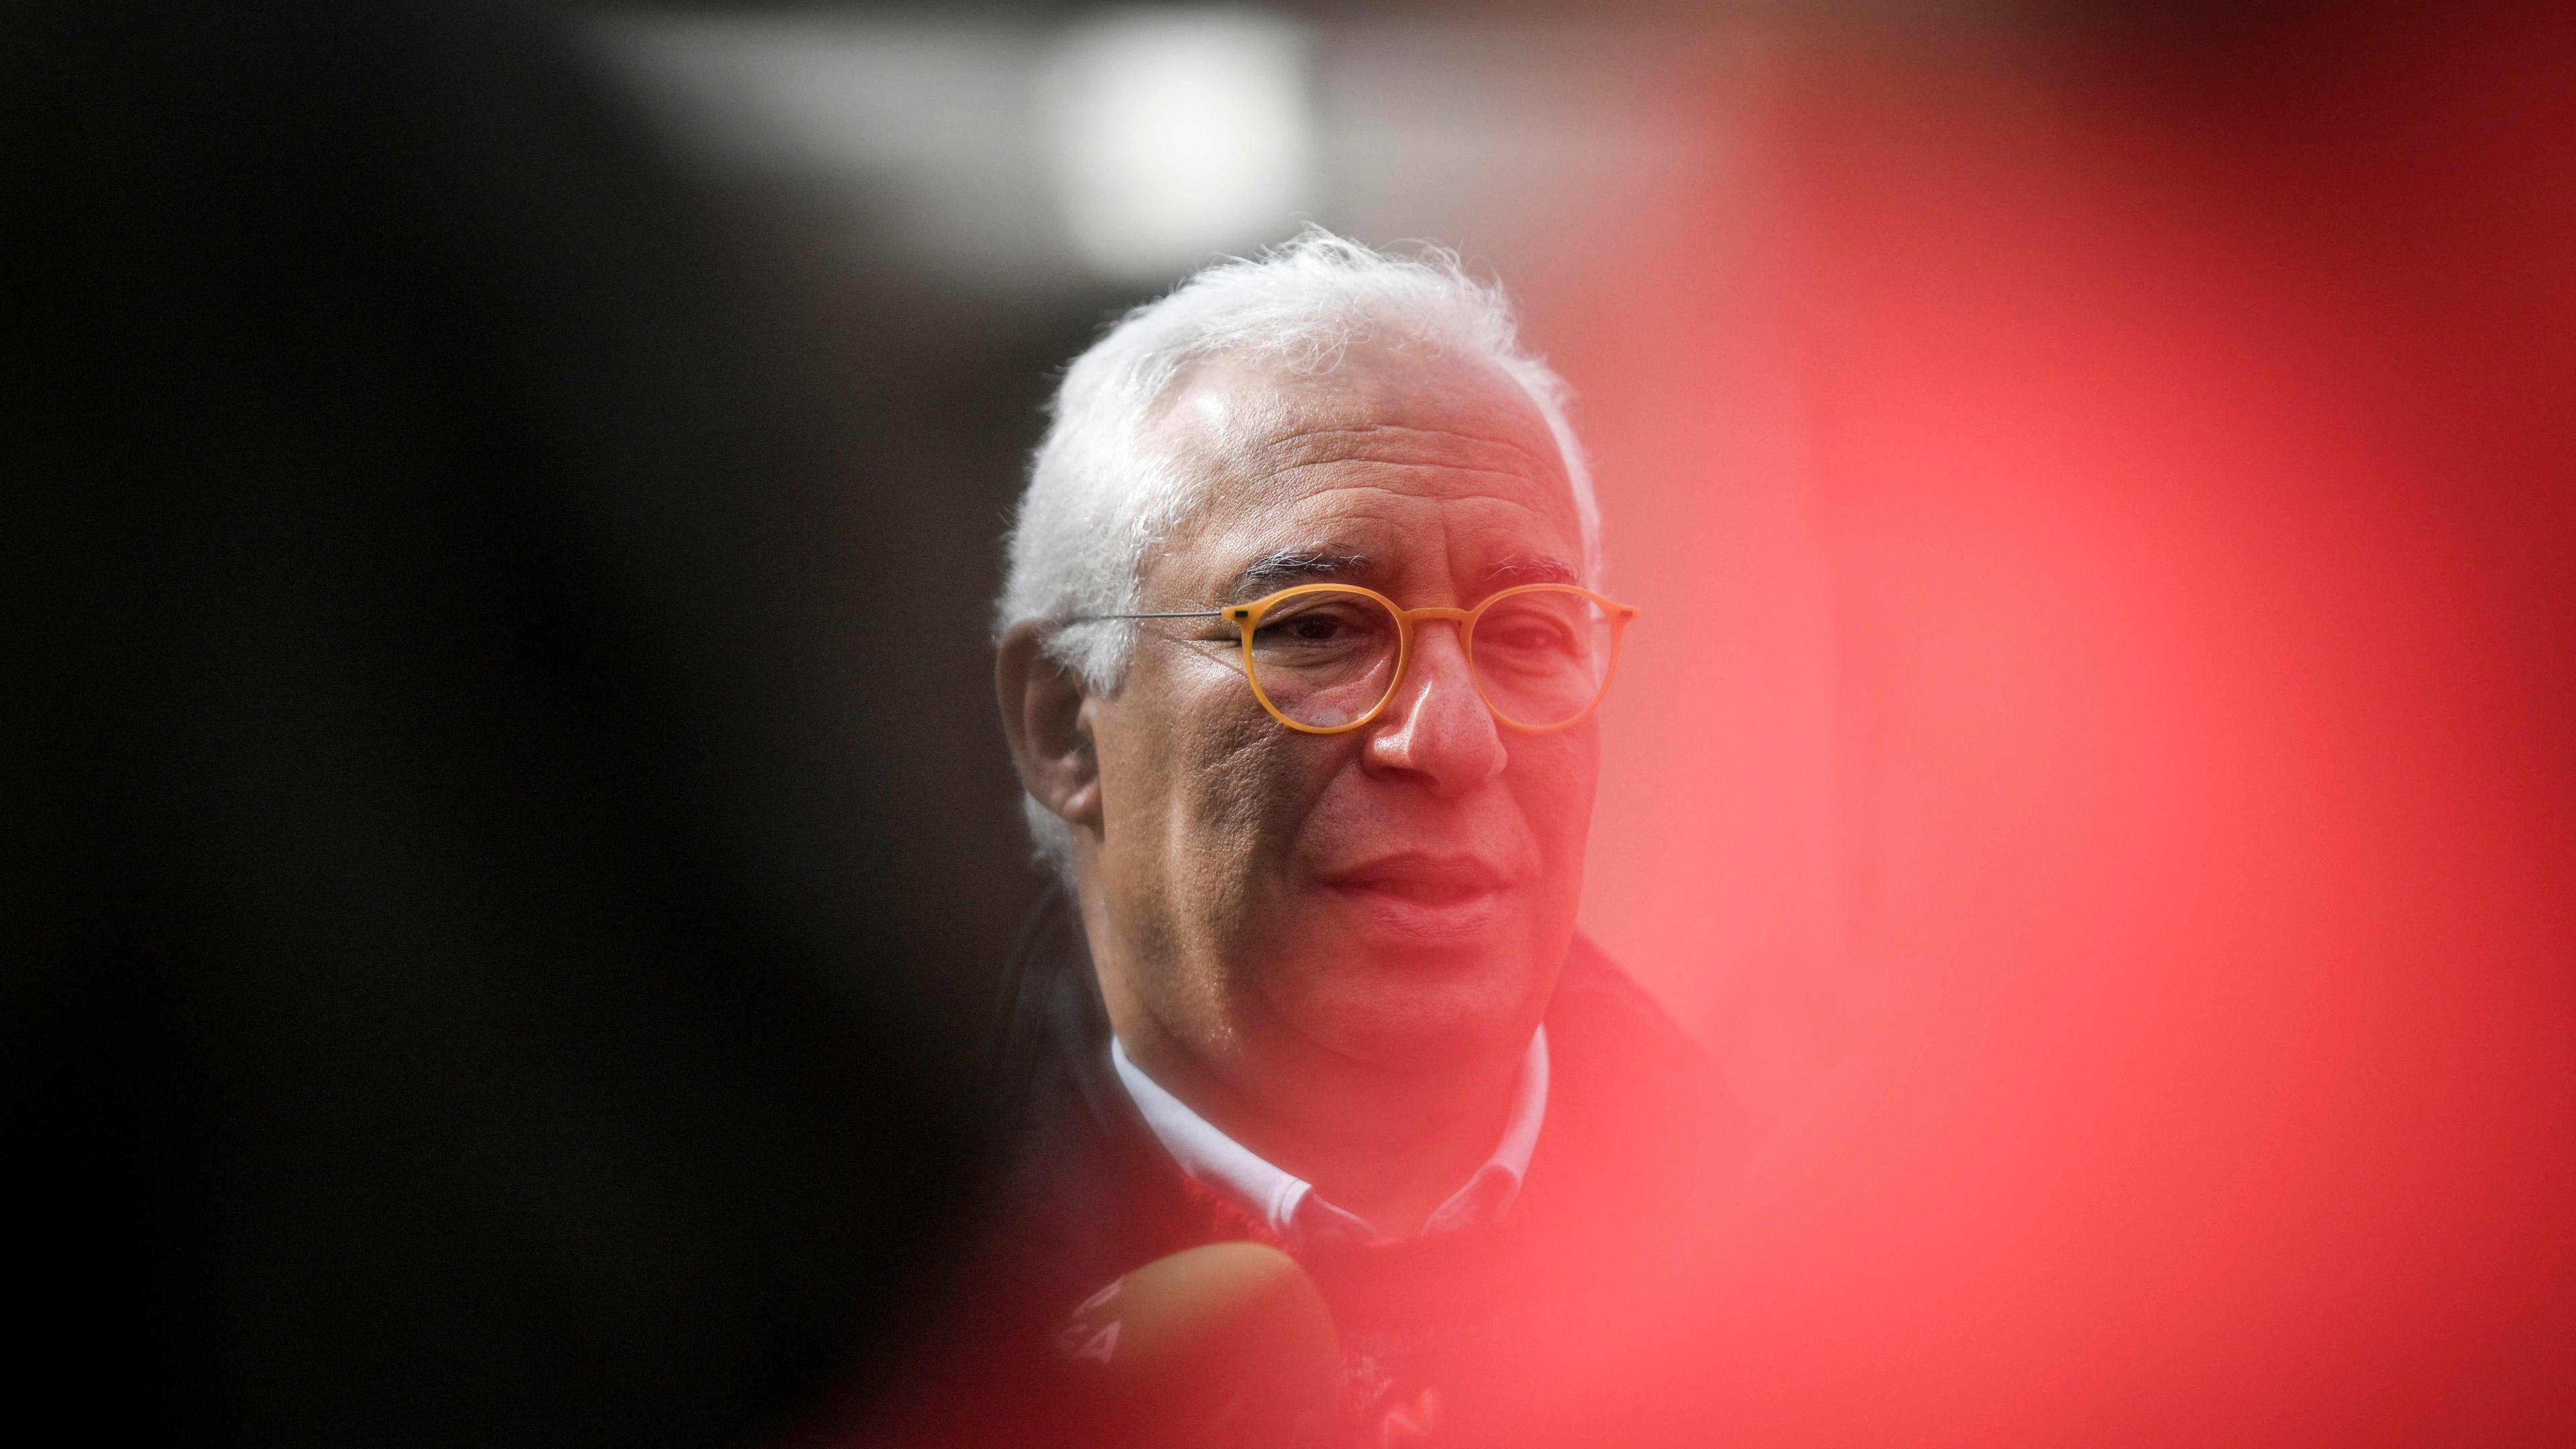 TOPSHOT - Outgoing Portuguese Prime Minister Antonio Costa speaks to the press after cast his ballot at a polling station in Benfica, Lisbon, during the legislative elections held on March 10, 2024 in Portugal. Voters in Portugal go to the polls today in an early election that could see the country join the shift to the right seen across Europe after eight years of Socialist rule. Final polls published on March 8, 2024 indicate the centre-right Democratic Alliance (AD) is narrowly ahead of the Socialist Party (PS) but short of an outright majority in parliament, and that far-right party Chega could be the kingmaker. Nevertheless, results remain wide open due to the large number of undecided voters. (Photo by PATRICIA DE MELO MOREIRA / AFP)